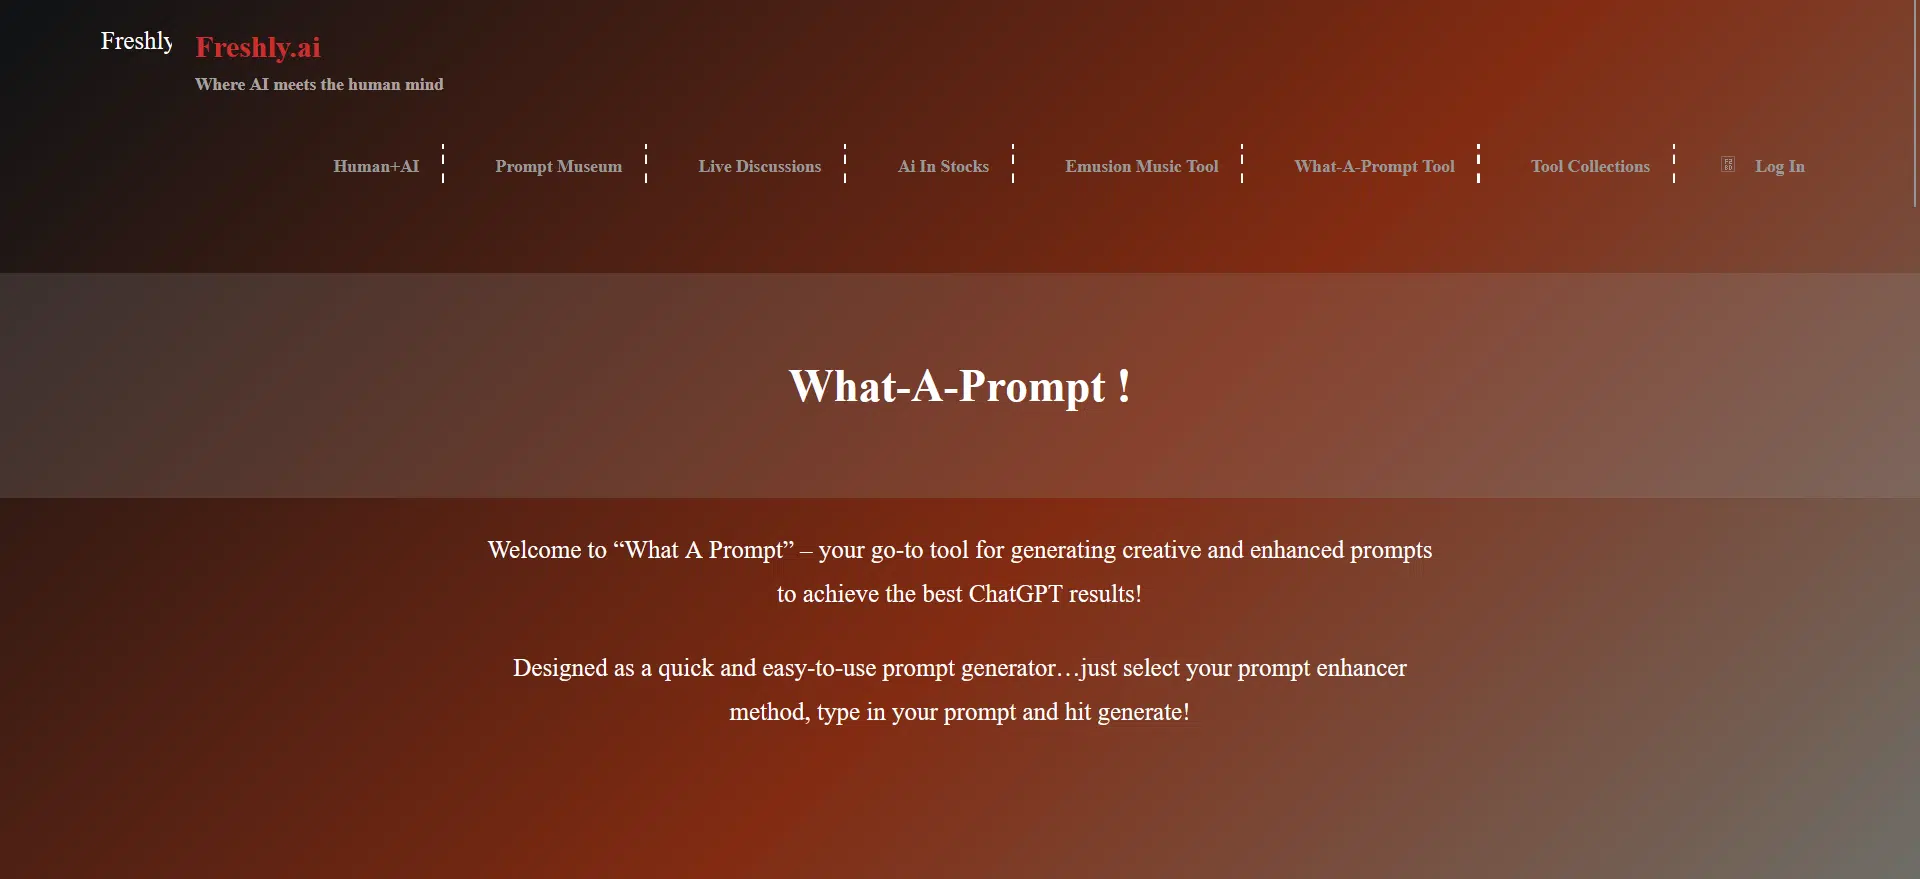 What-A-Promptwebsite picture